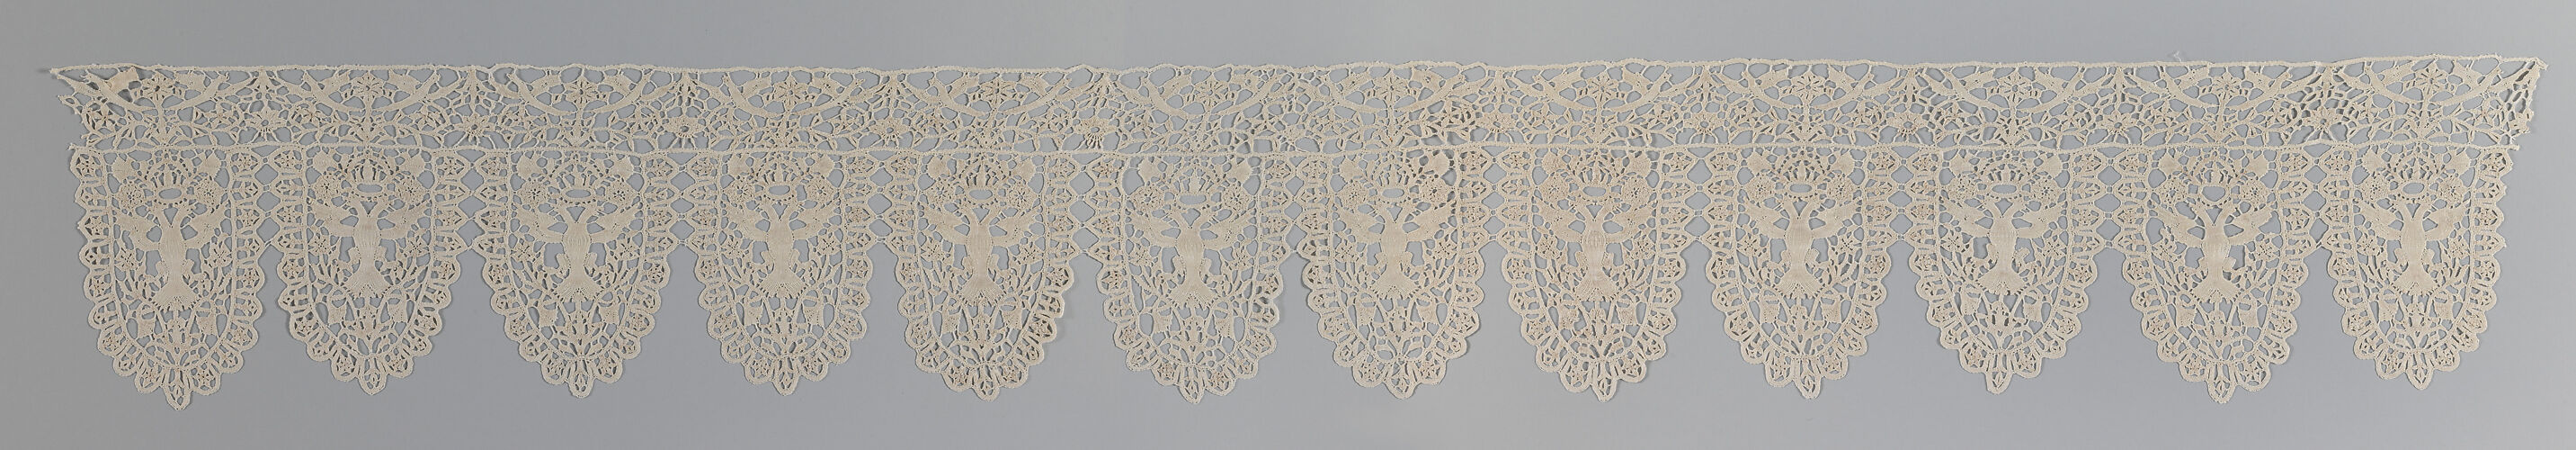 Lace border with double-headed eagle